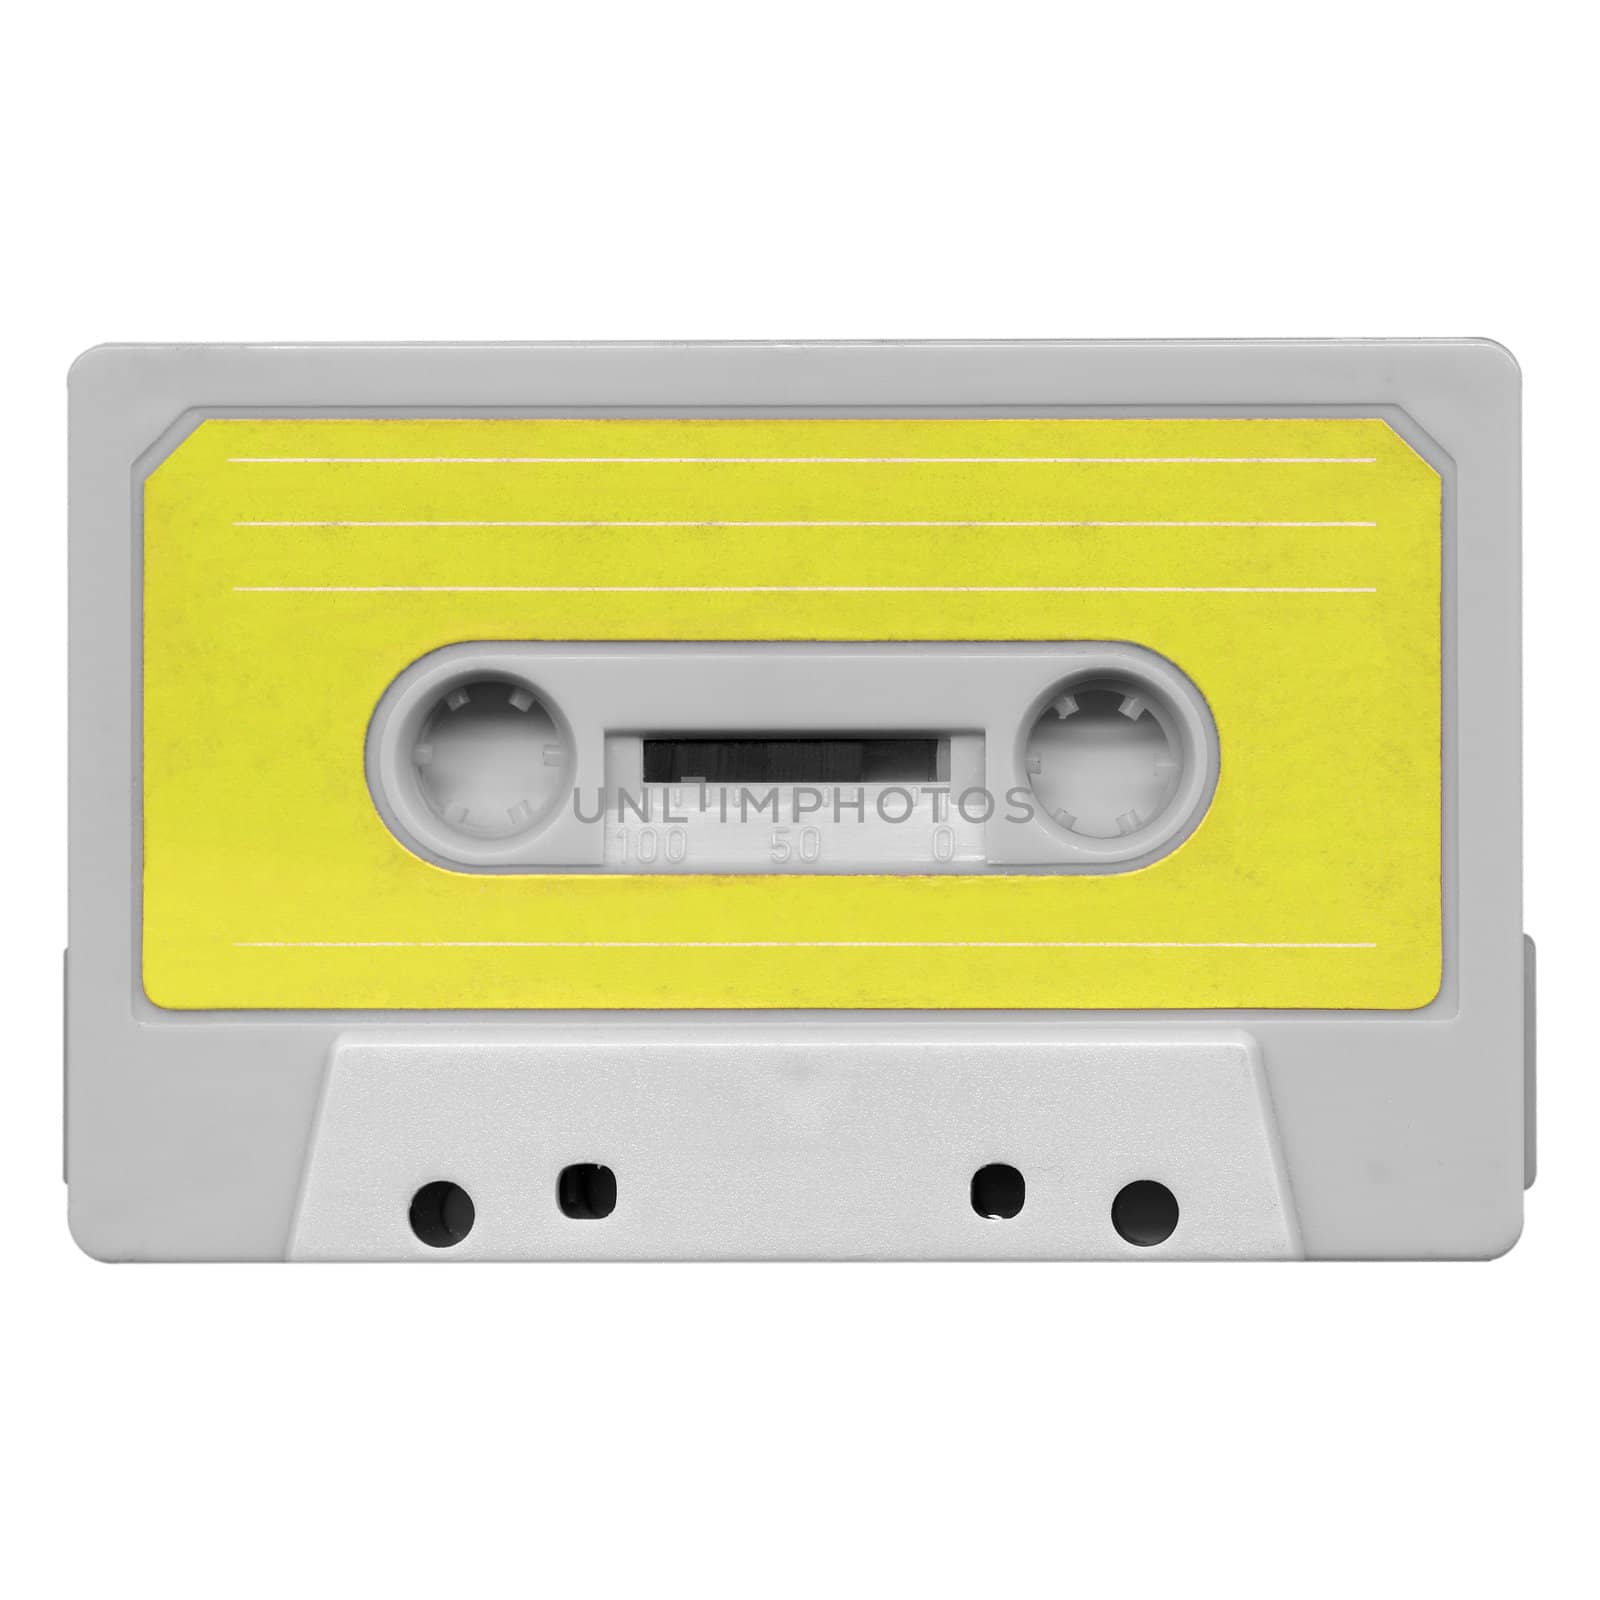 Magnetic tape cassette for audio music recording - isolated over white background